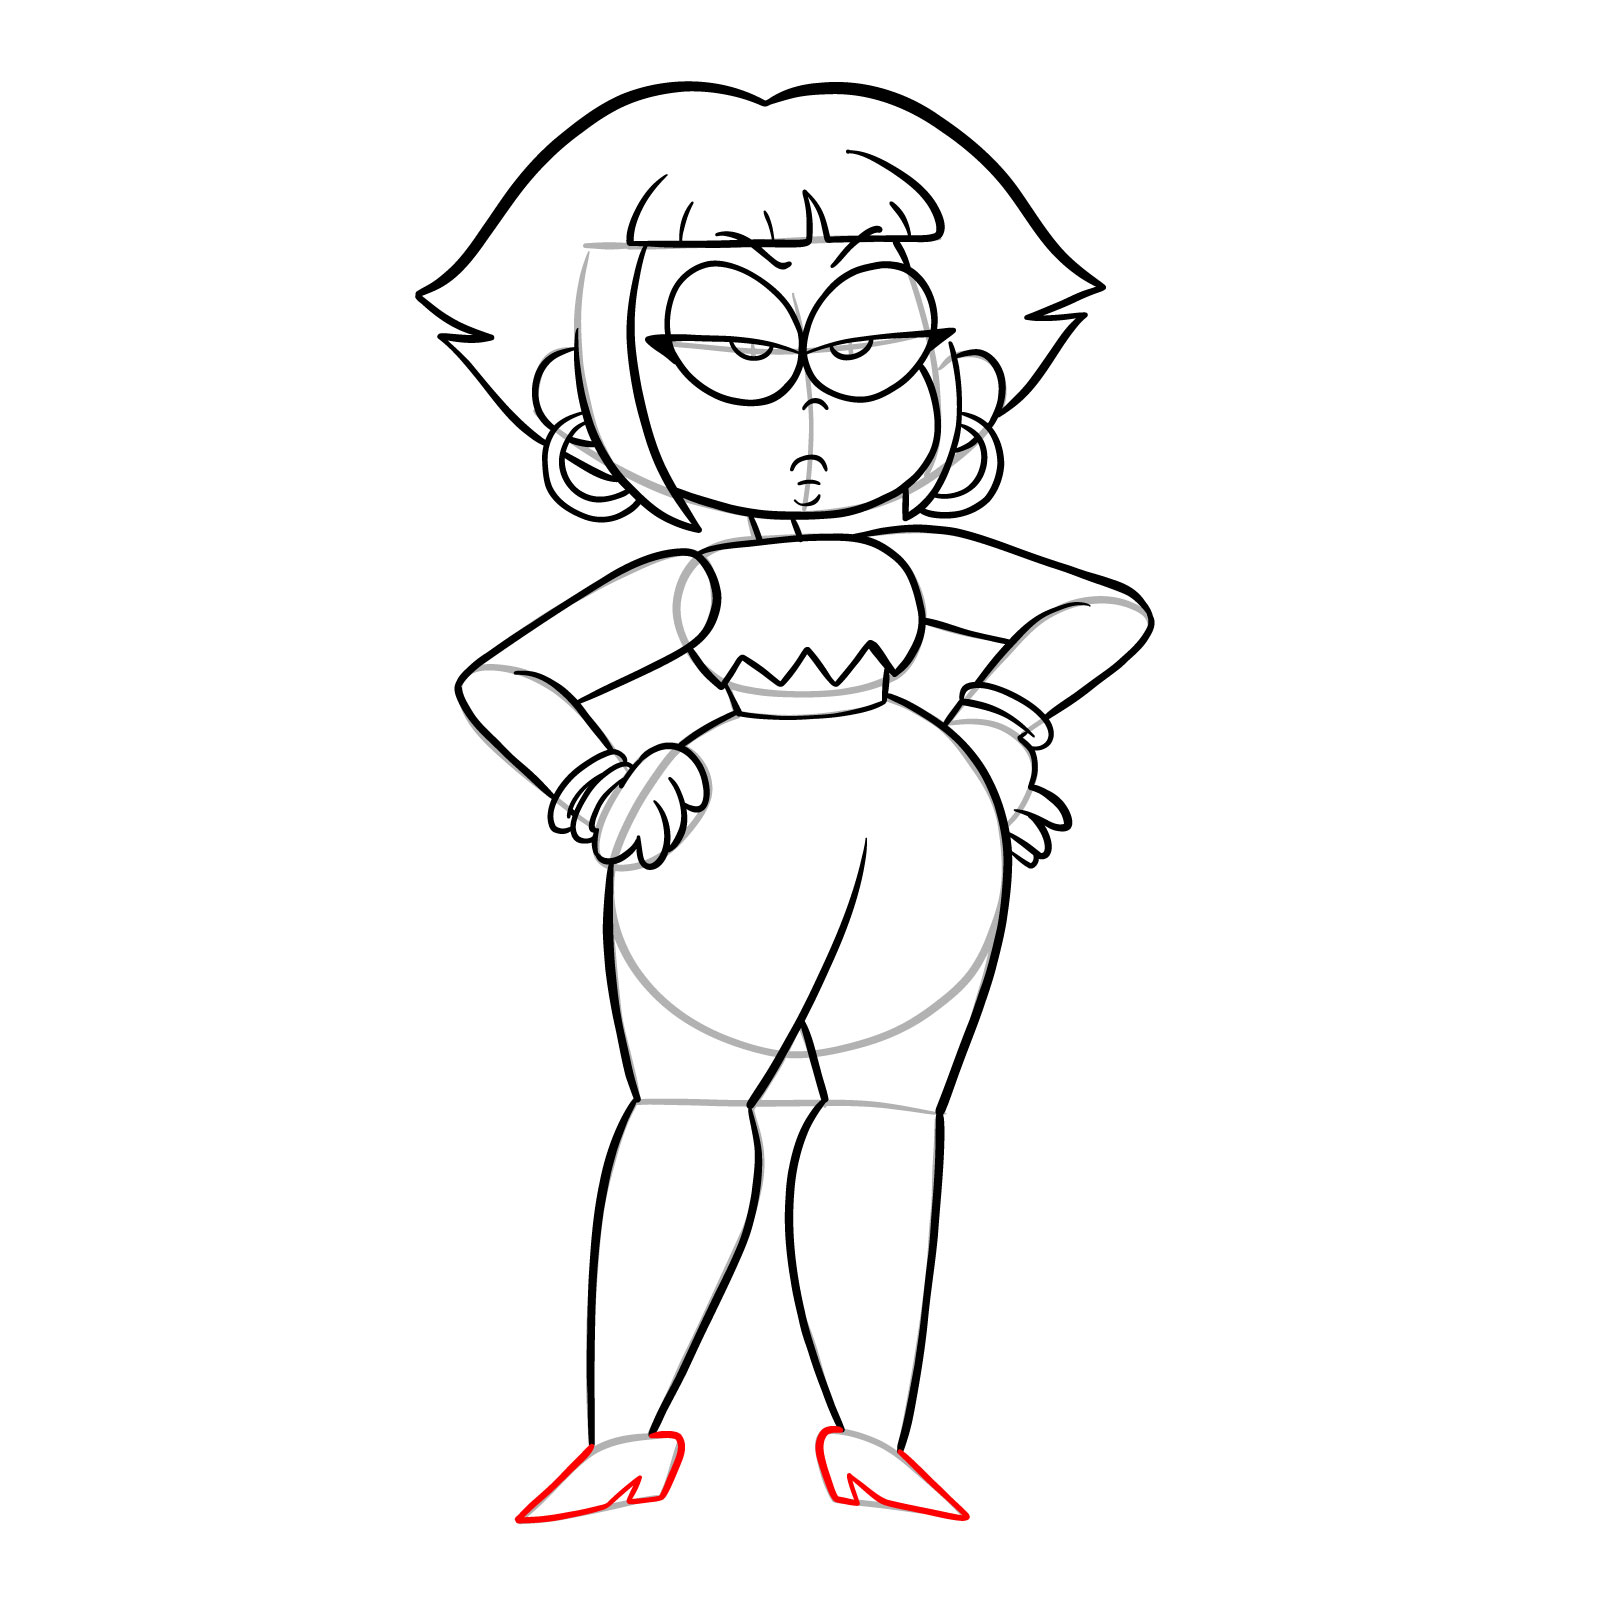 How to draw Human Shannon from OK K.O.! - step 27